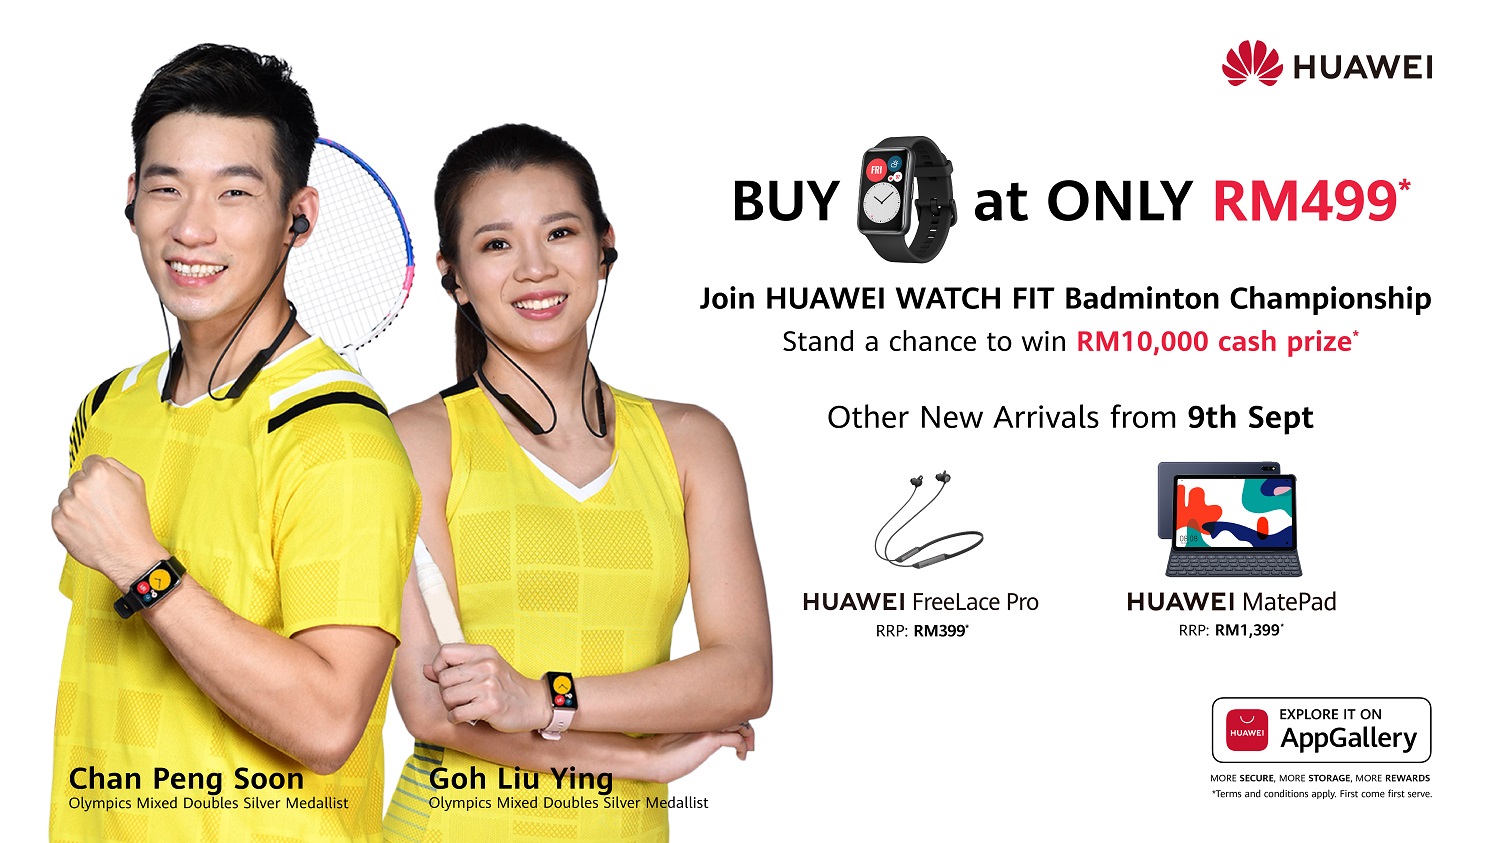 Join The HUAWEI WATCH FIT Badminton Championship On 26th and 27th September